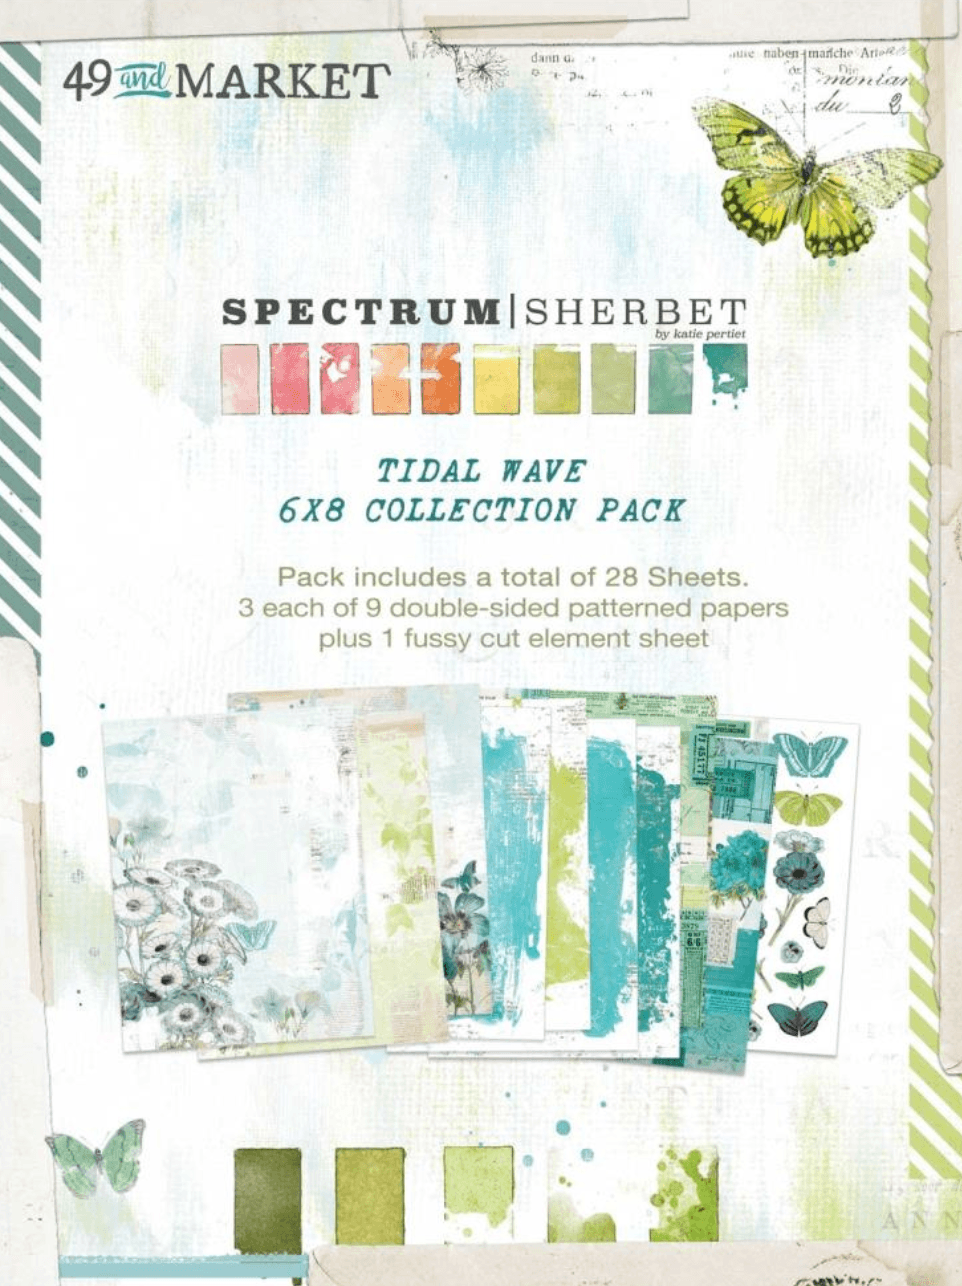 49 and Market - Spectrum Sherbet Tidal Wave Pack - 6x8 Inch - Messy Papercrafts